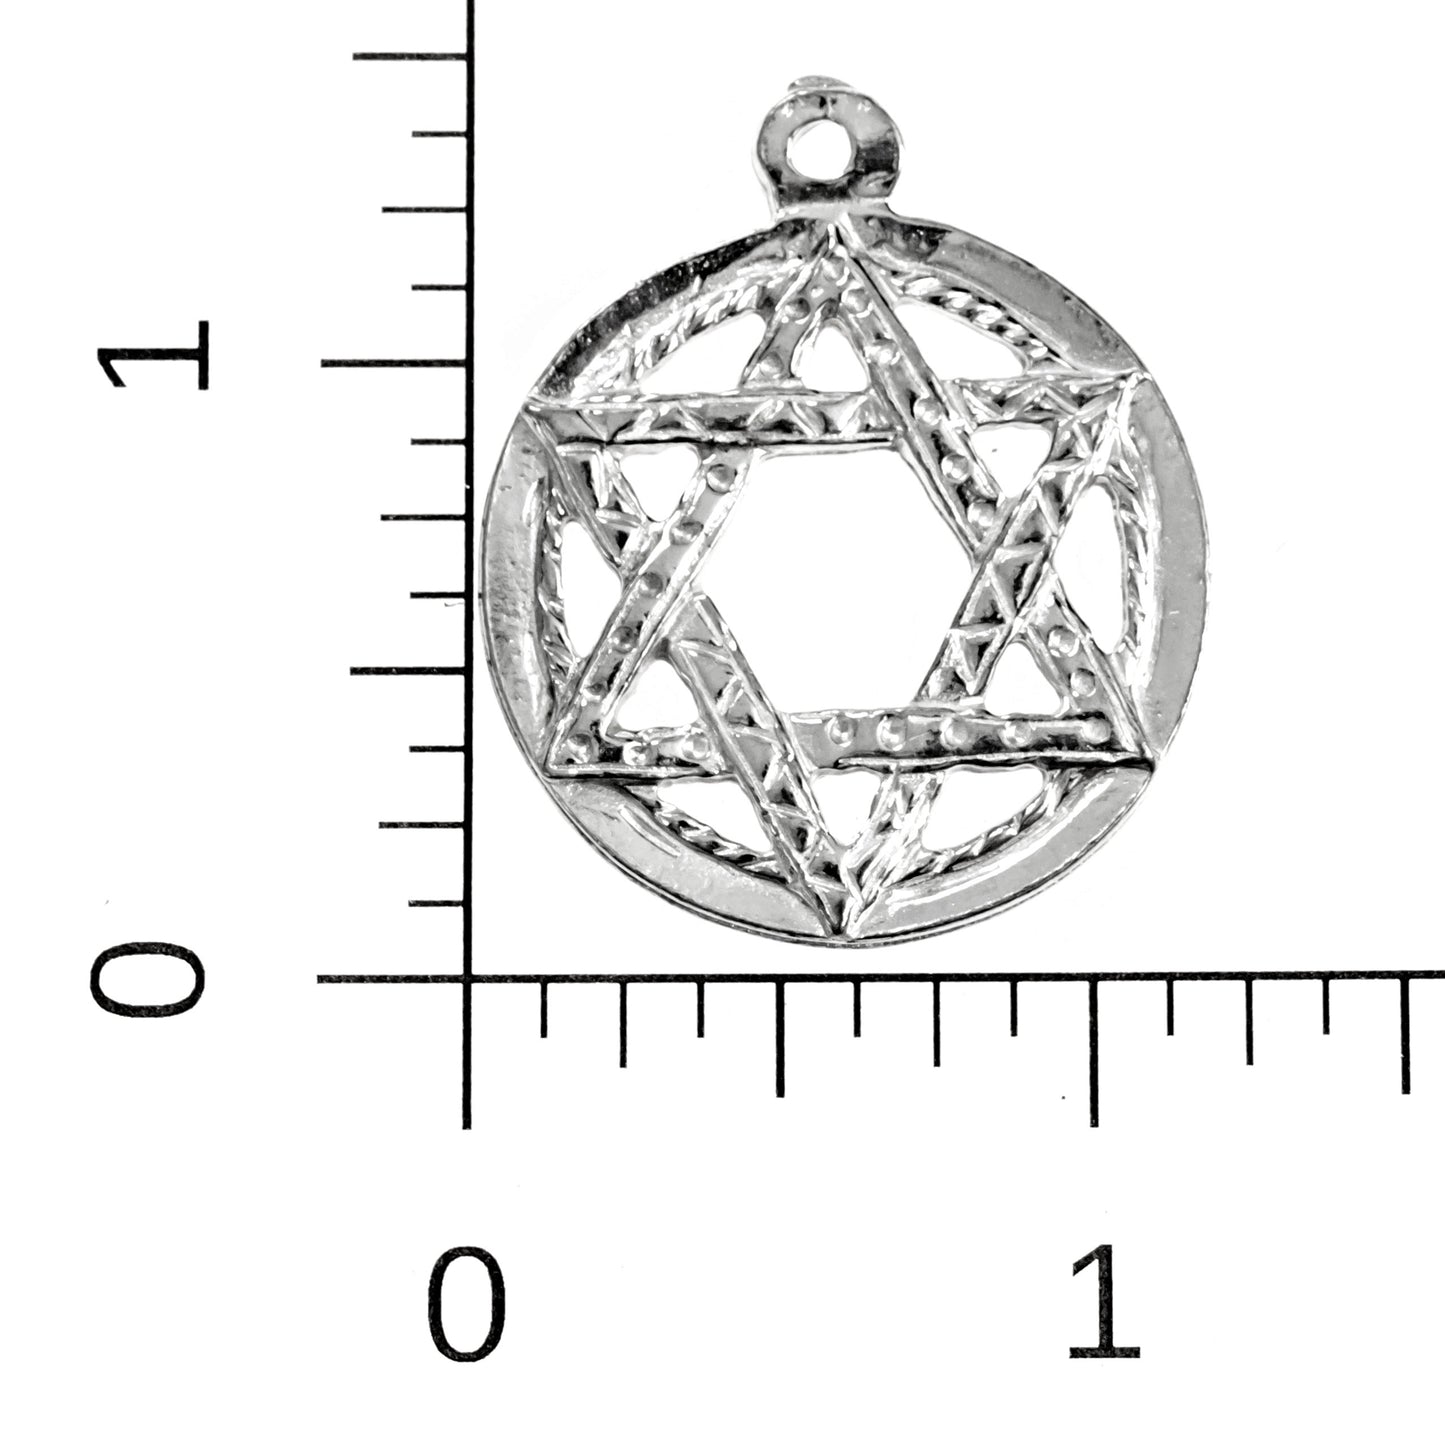 Star of David Jewelry Gifts - Star of David Pendant - Necklaces - Earrings - Keychain